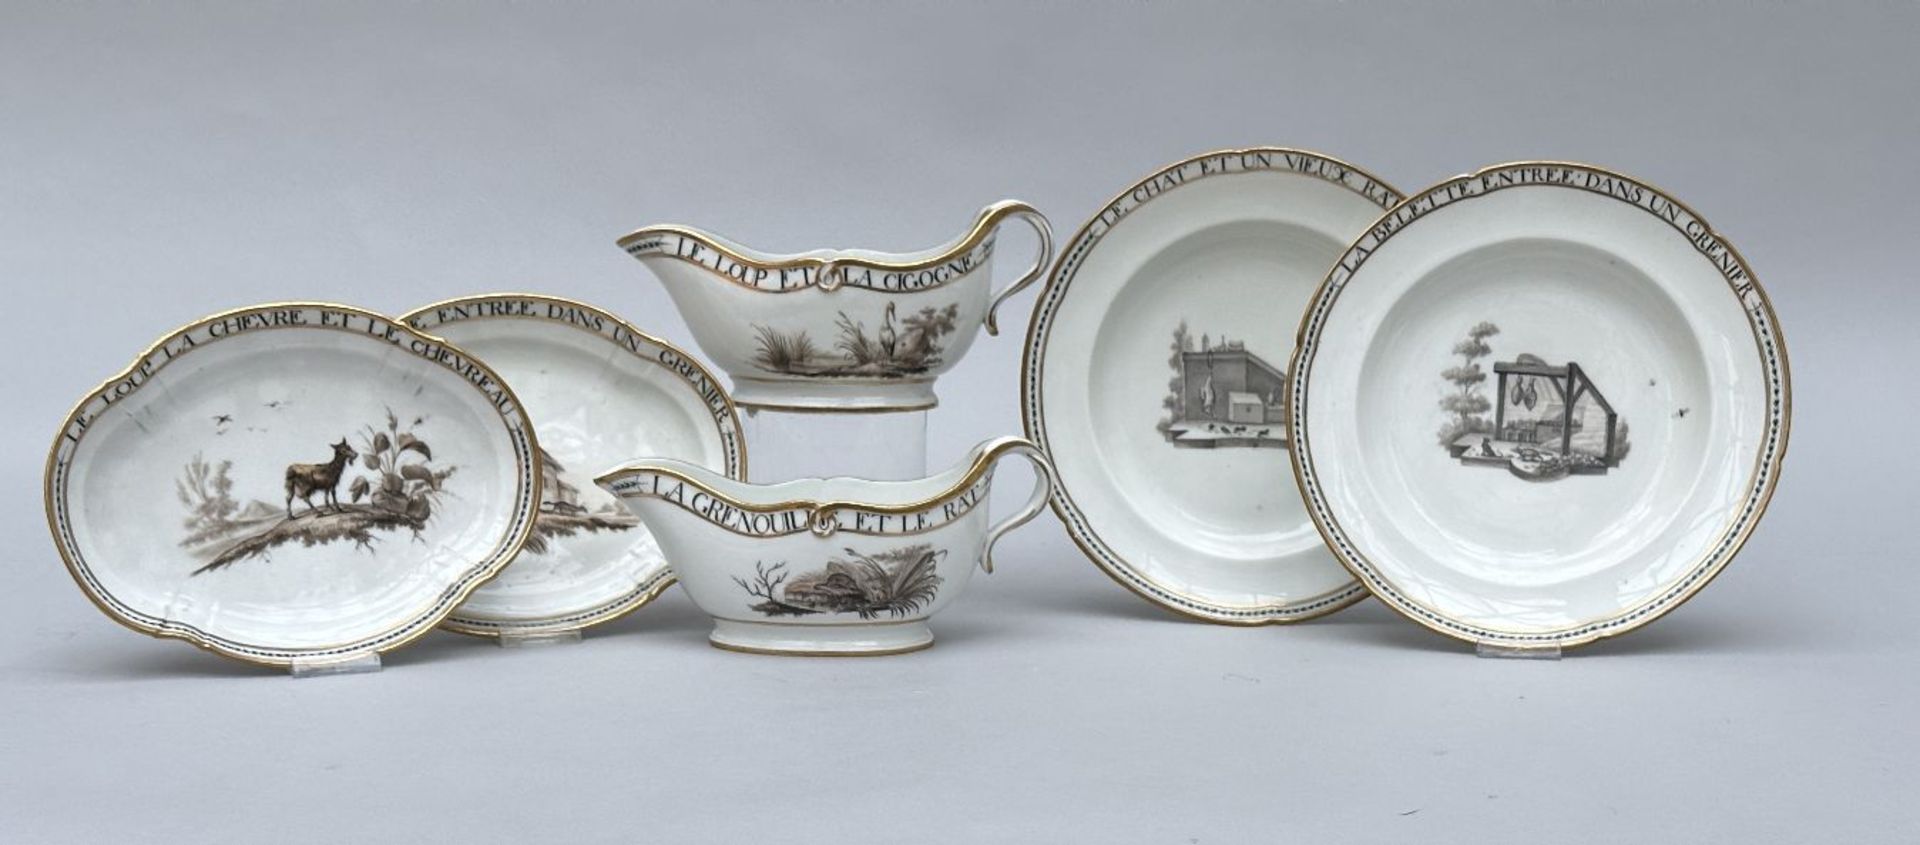 Two plates and two sauce boats in porcelain by Louis Cretté in Brussels 'fables de La Fontaine'